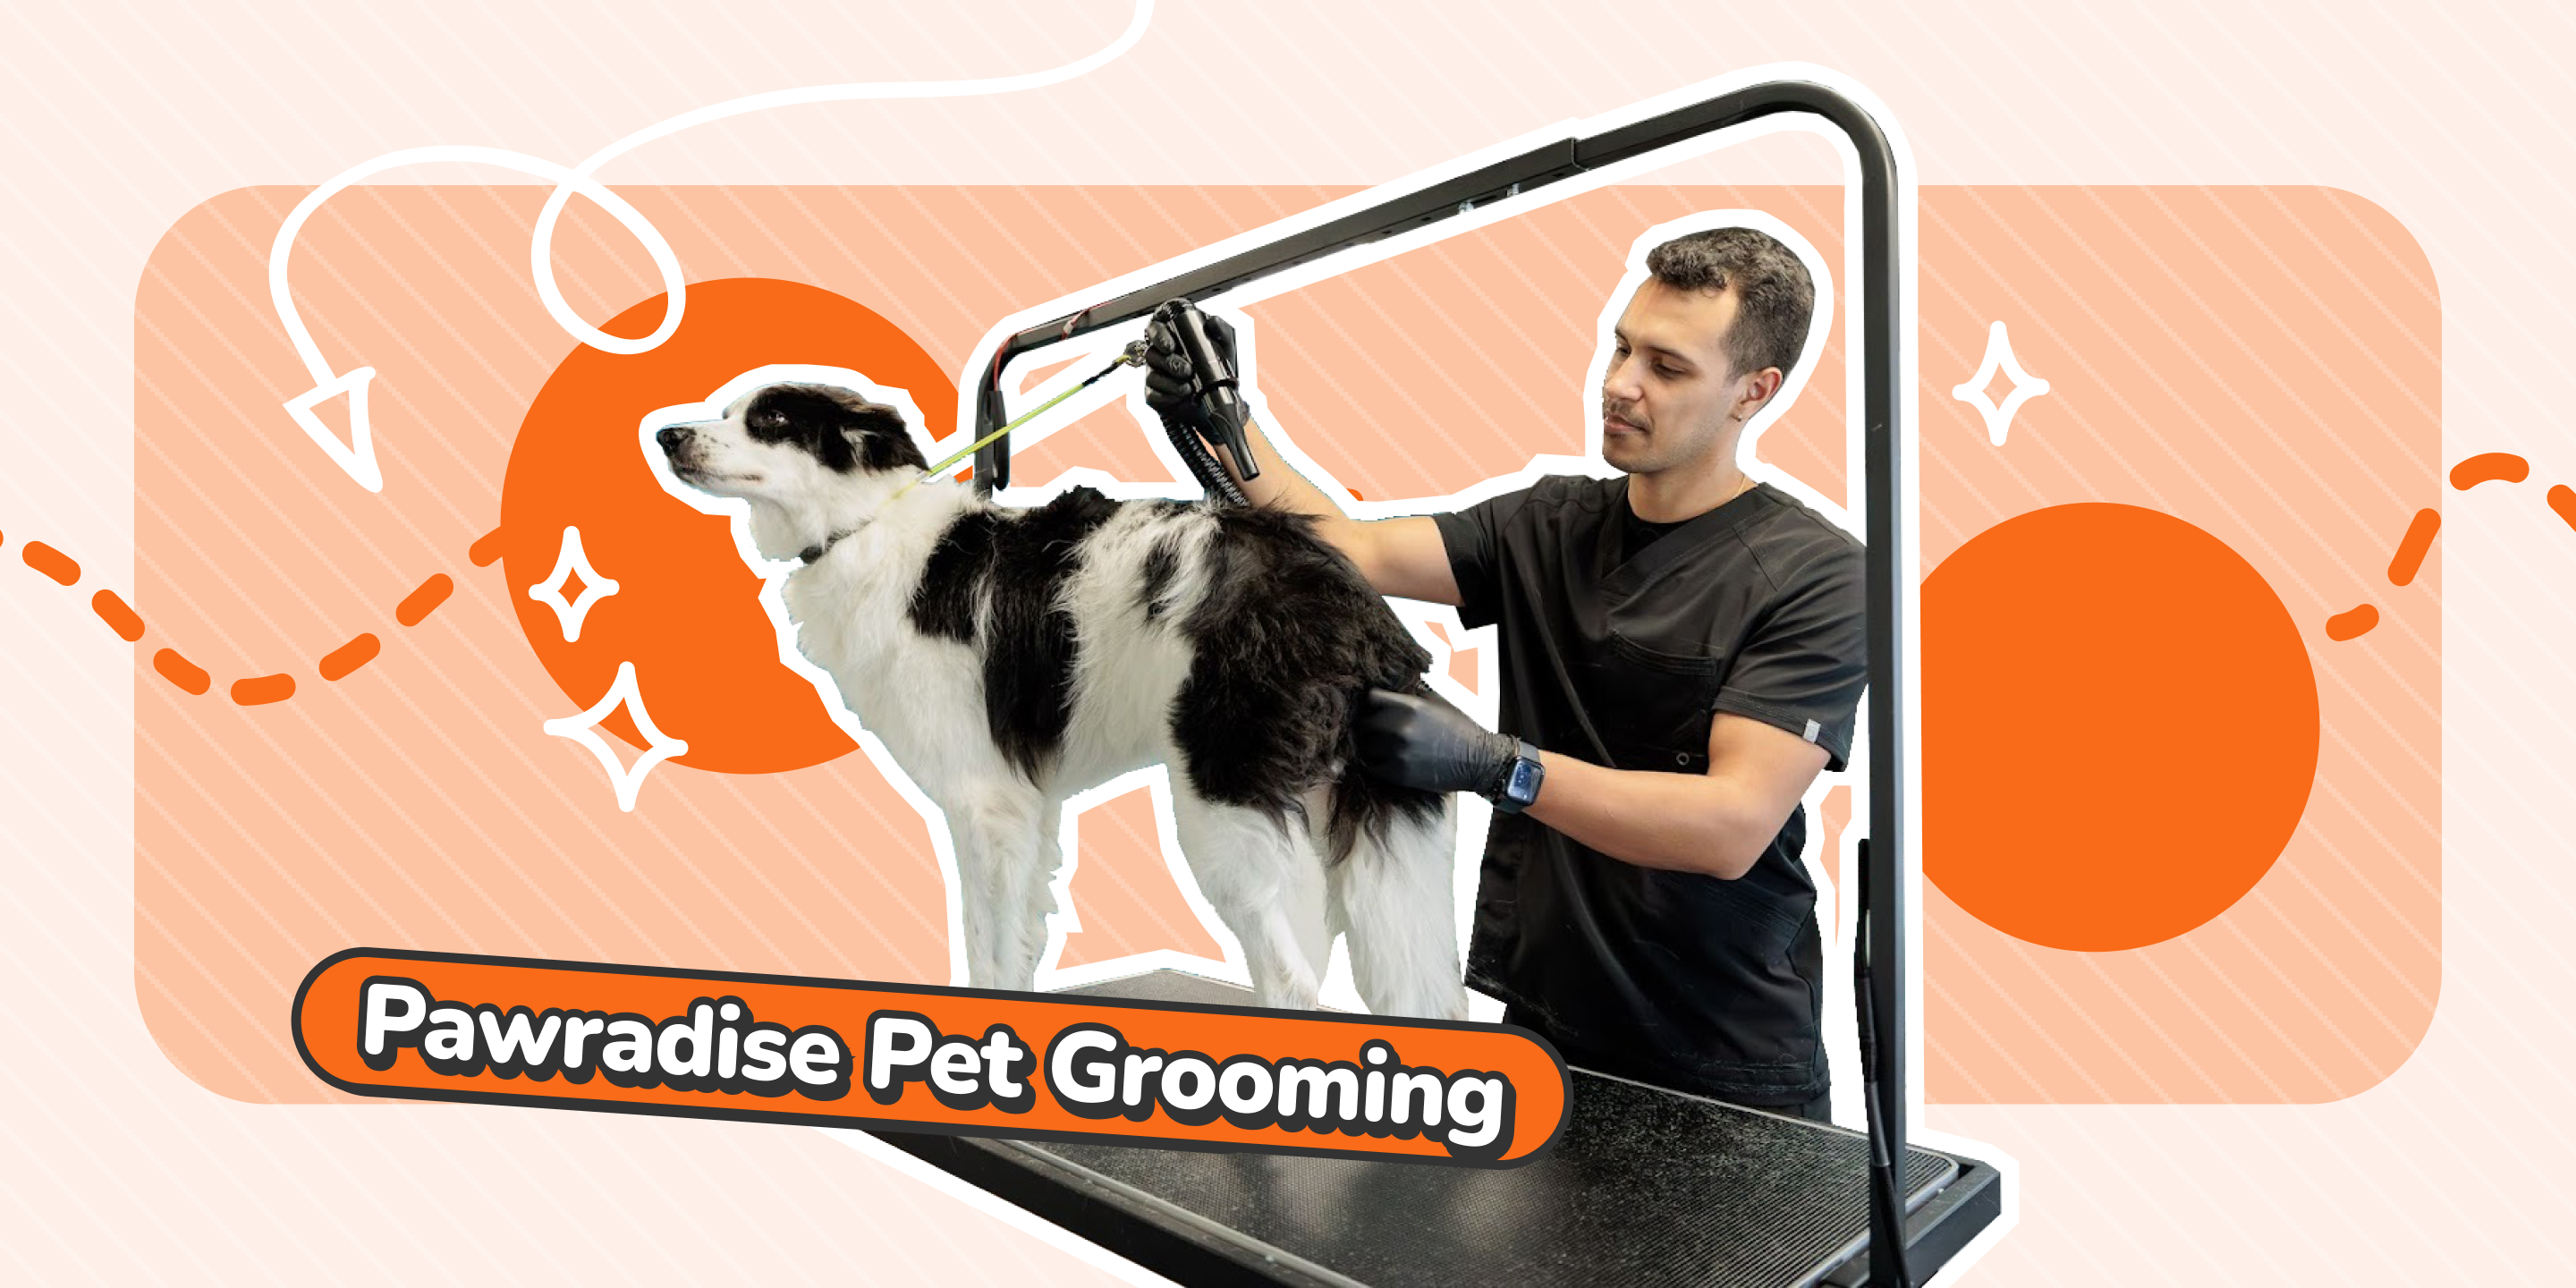 How Pawradise Pet Grooming Creates a Lifestyle Community Beyond Grooming